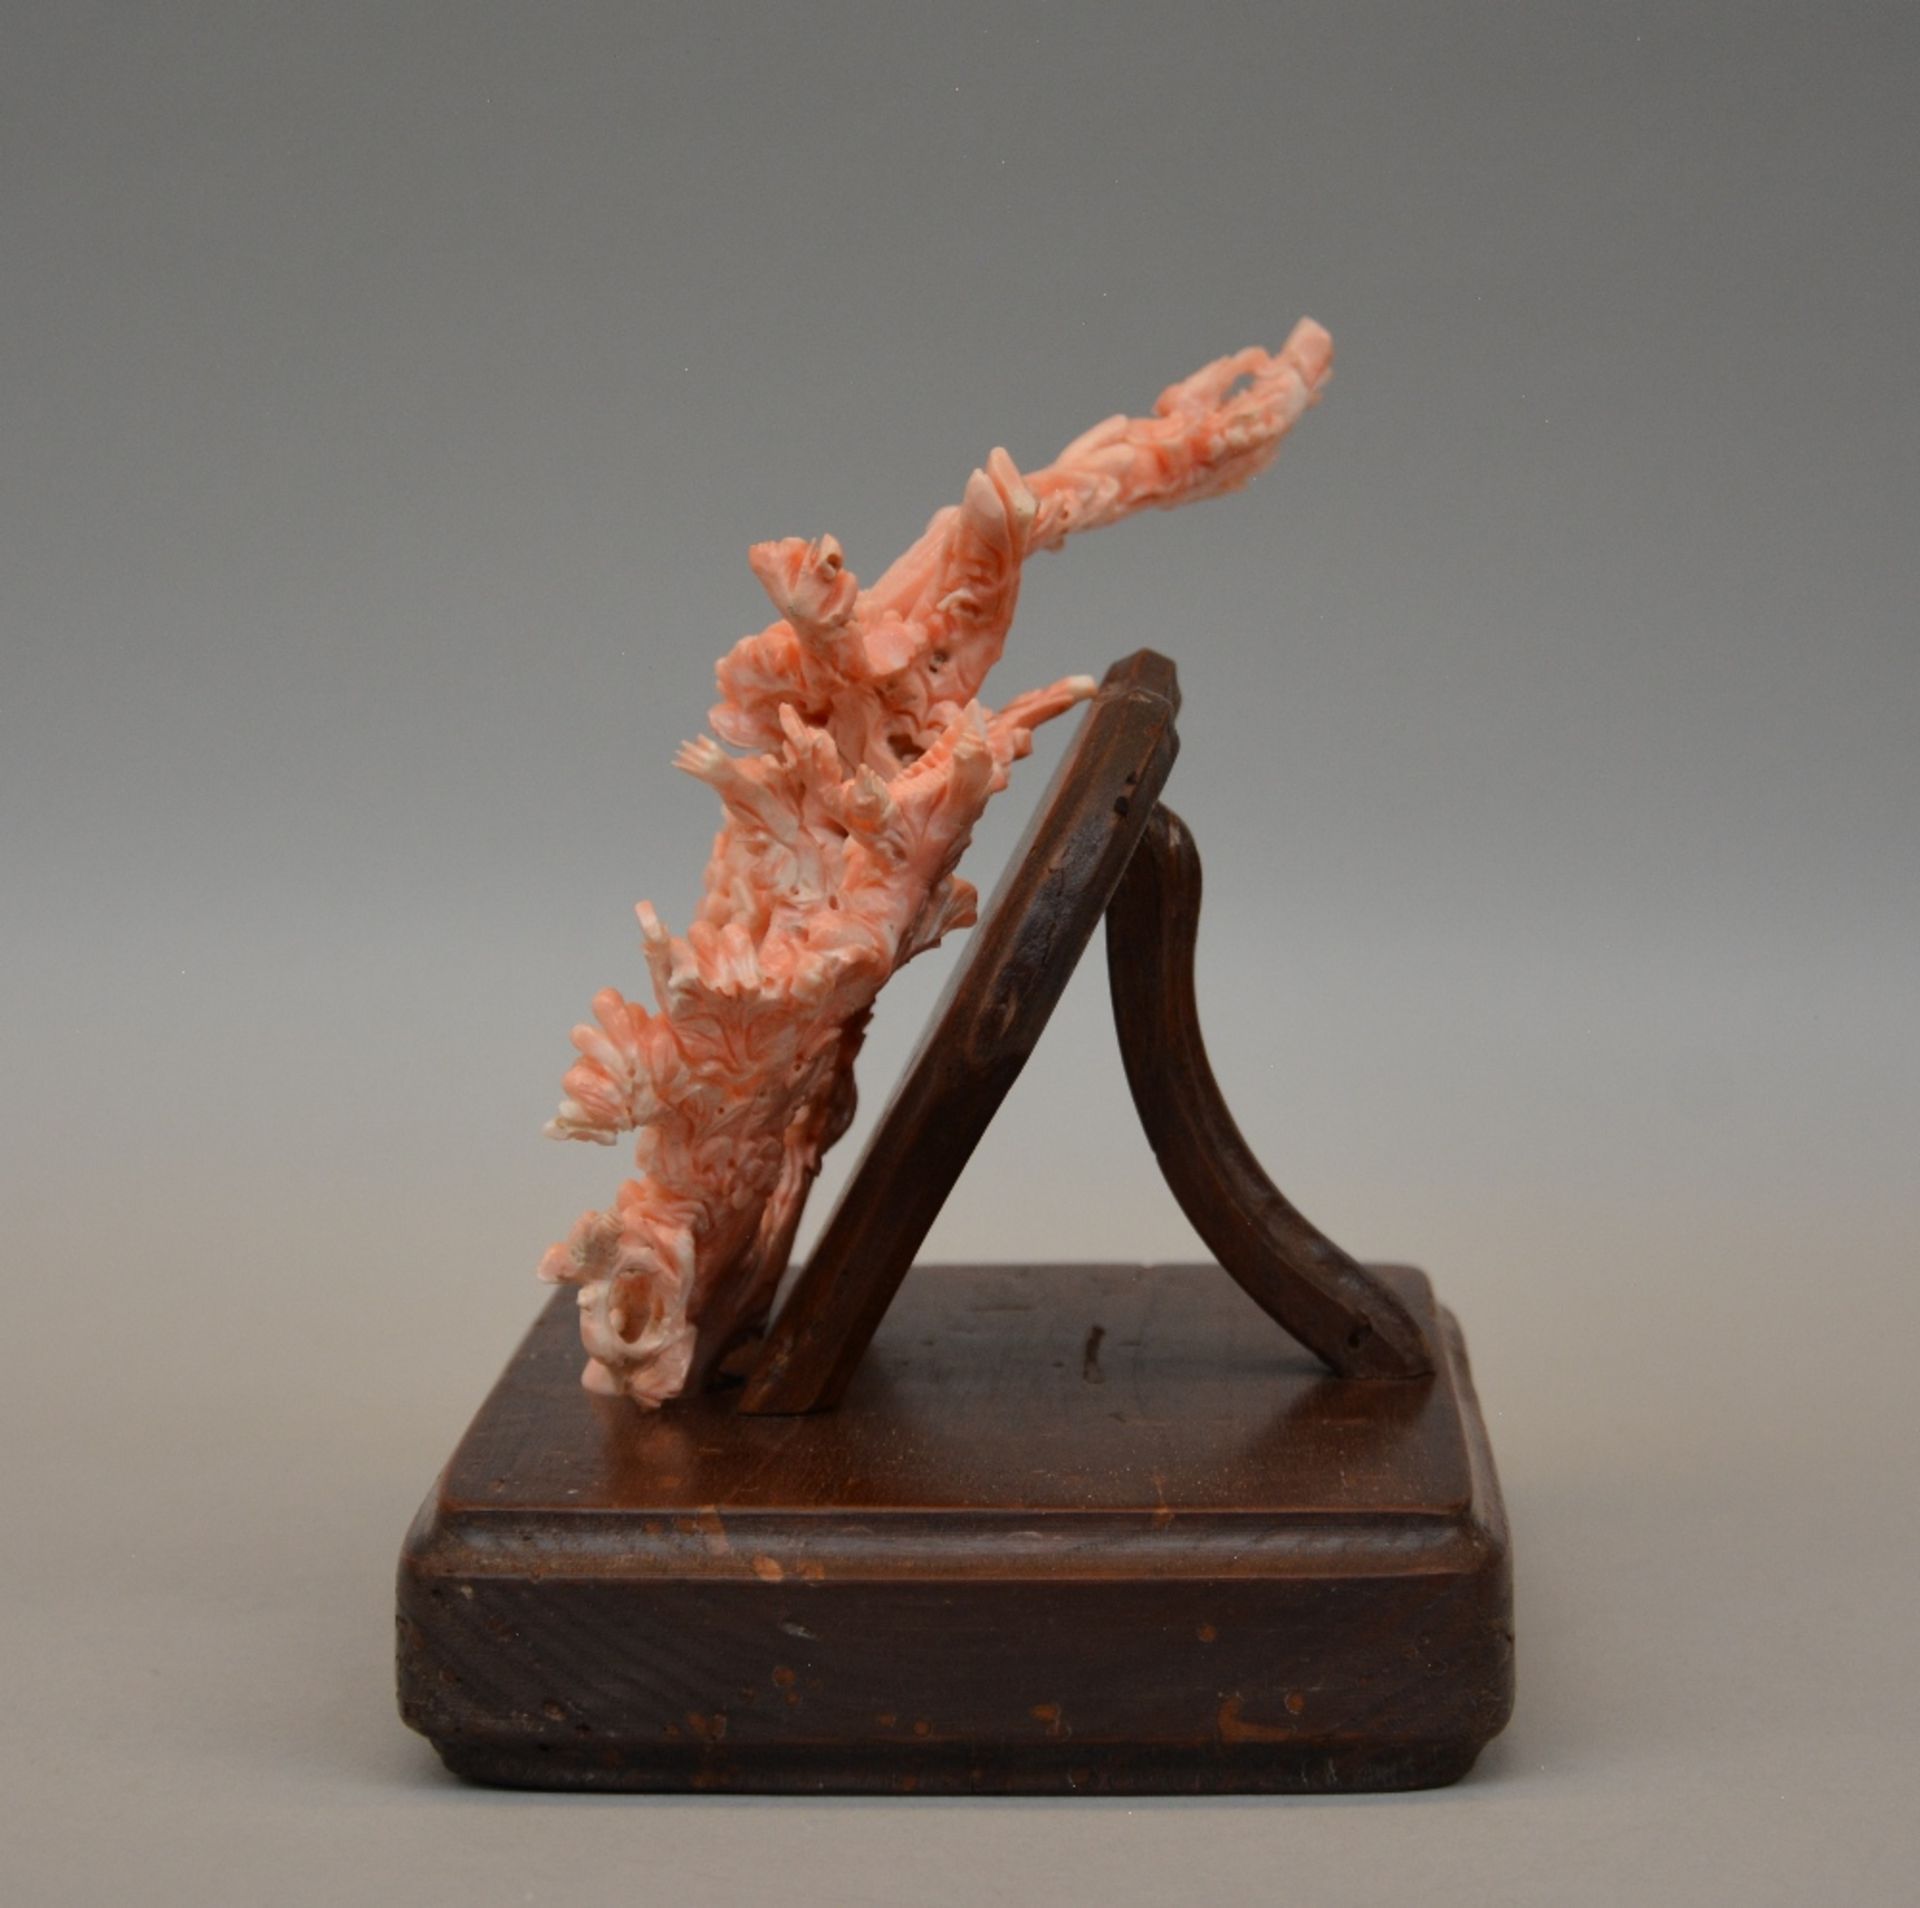 A Chinese red coral sculpture depicting birds and flowers, on a wooden base, H 19,5 - Weight about - Bild 2 aus 8